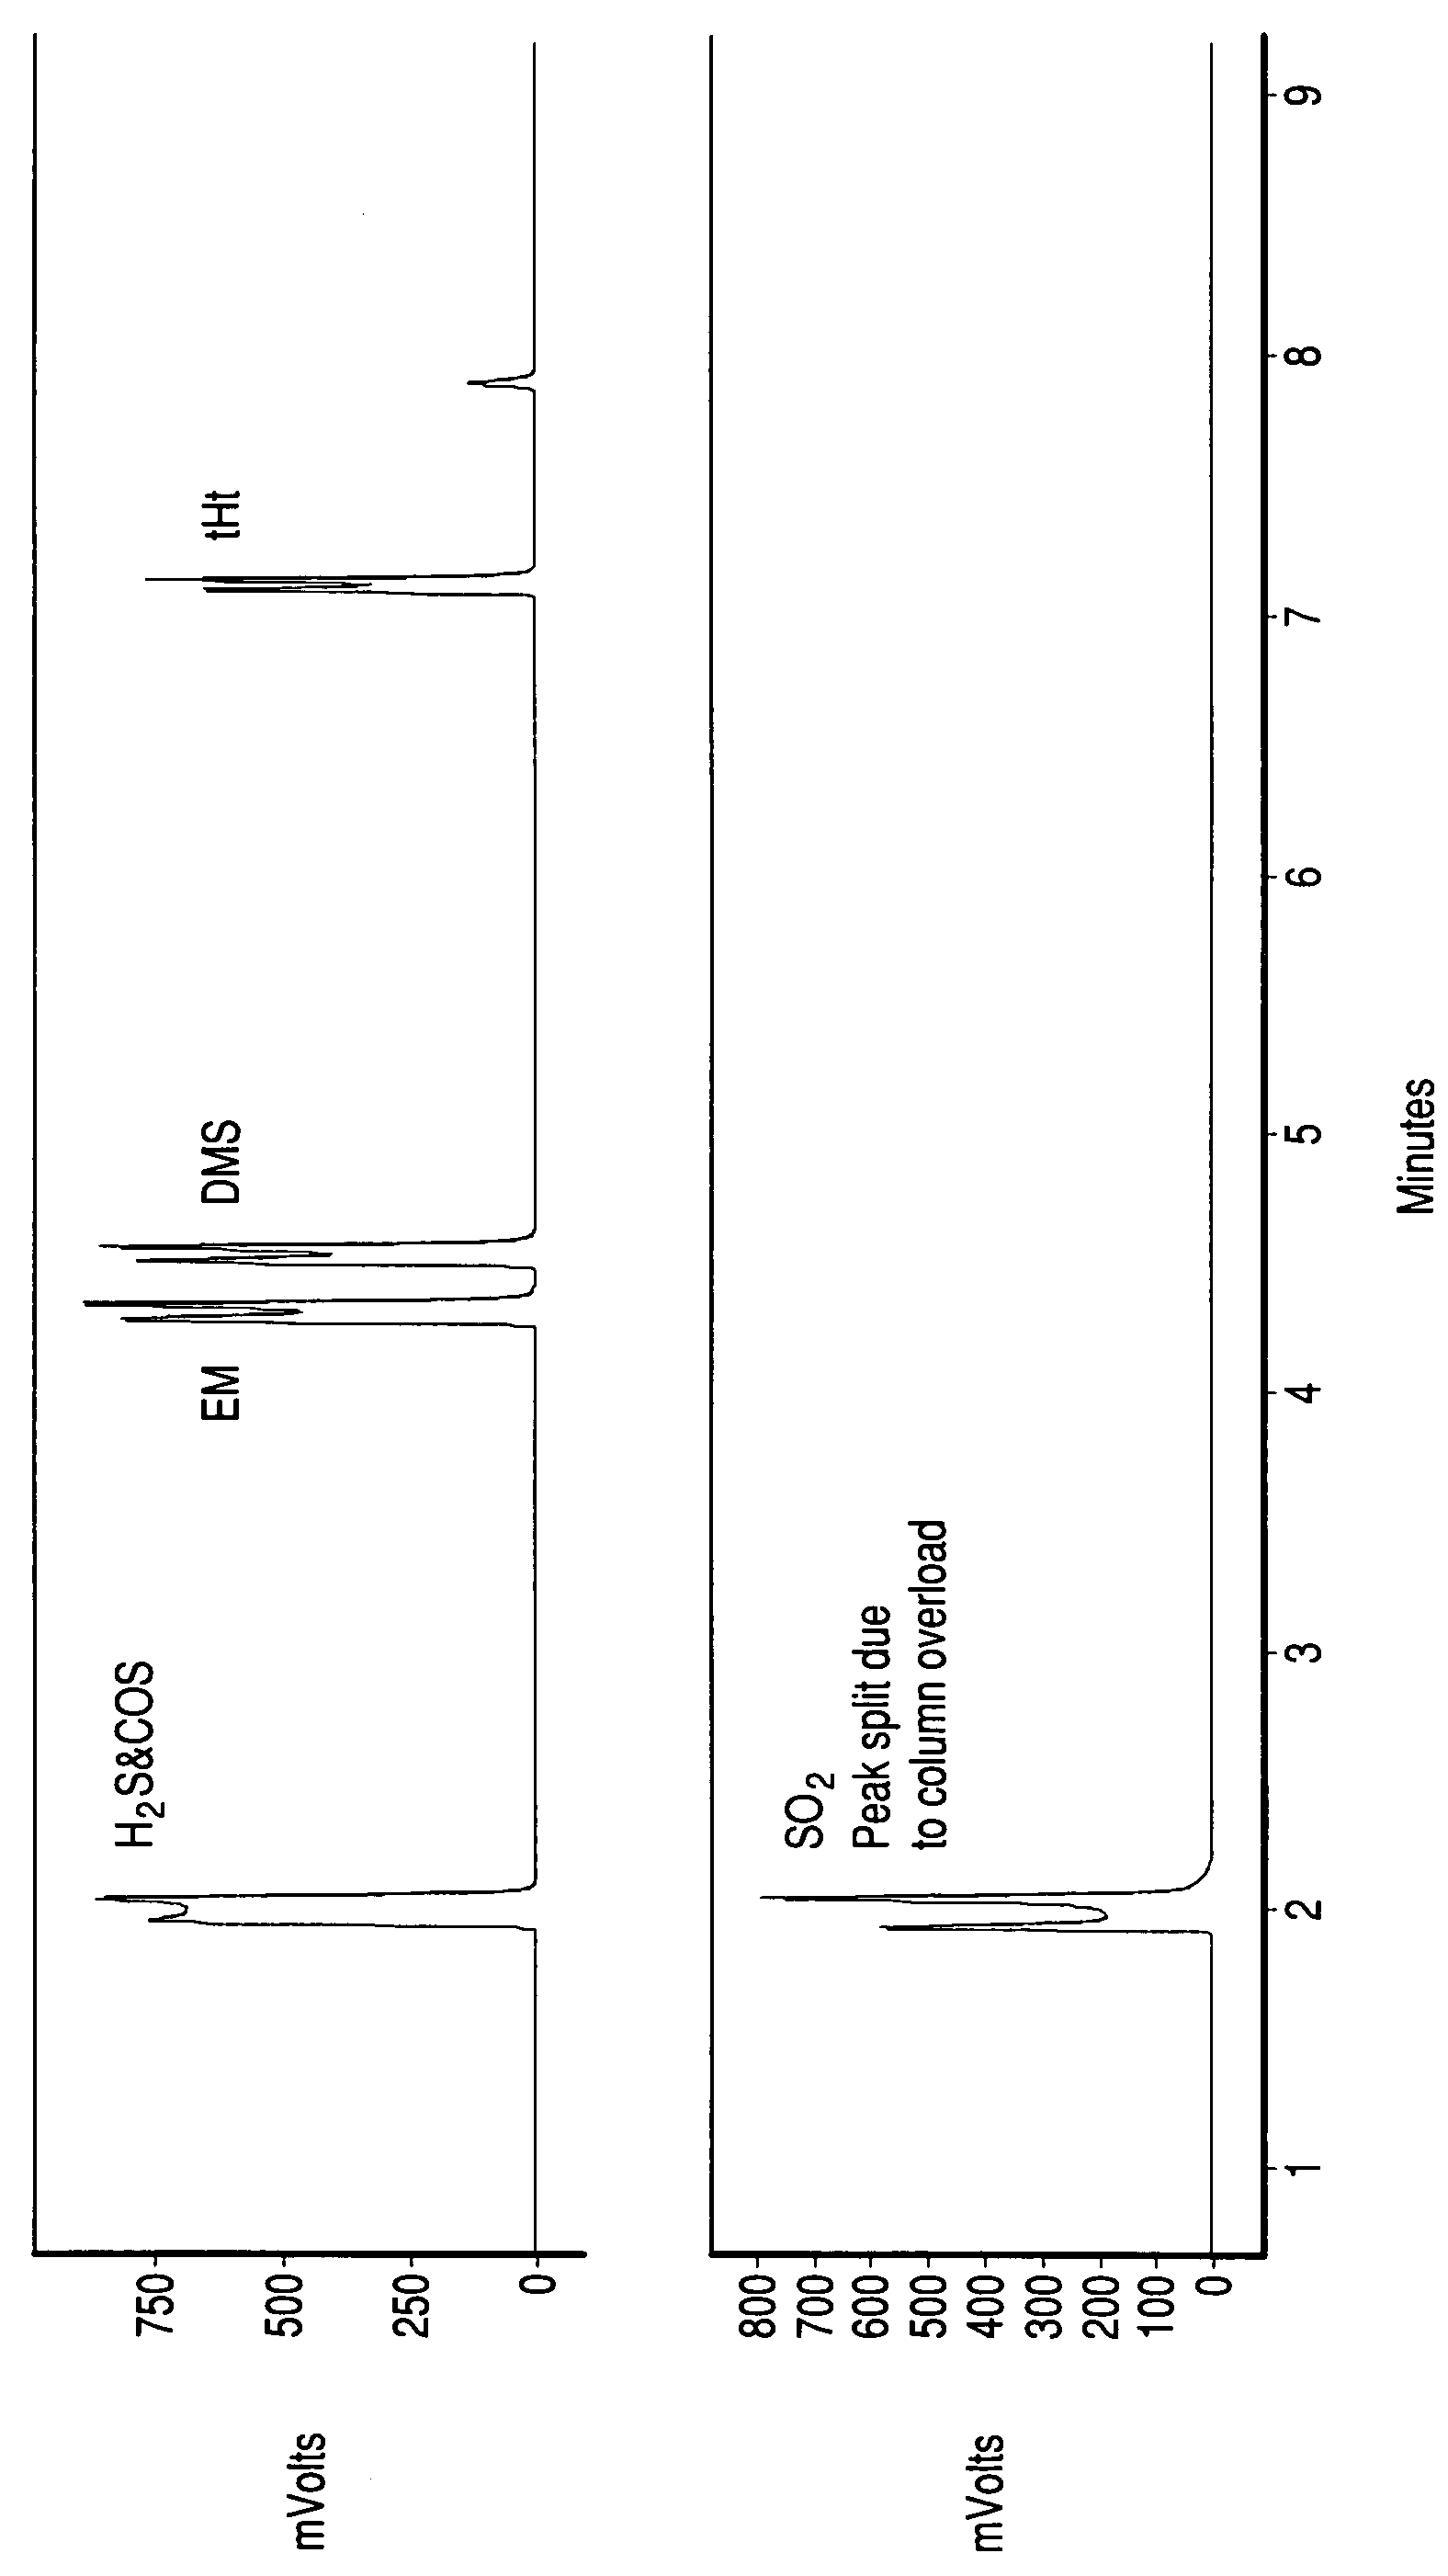 Method of desulfurizing a hydrocarbon gas by selective partial oxidation and adsorption